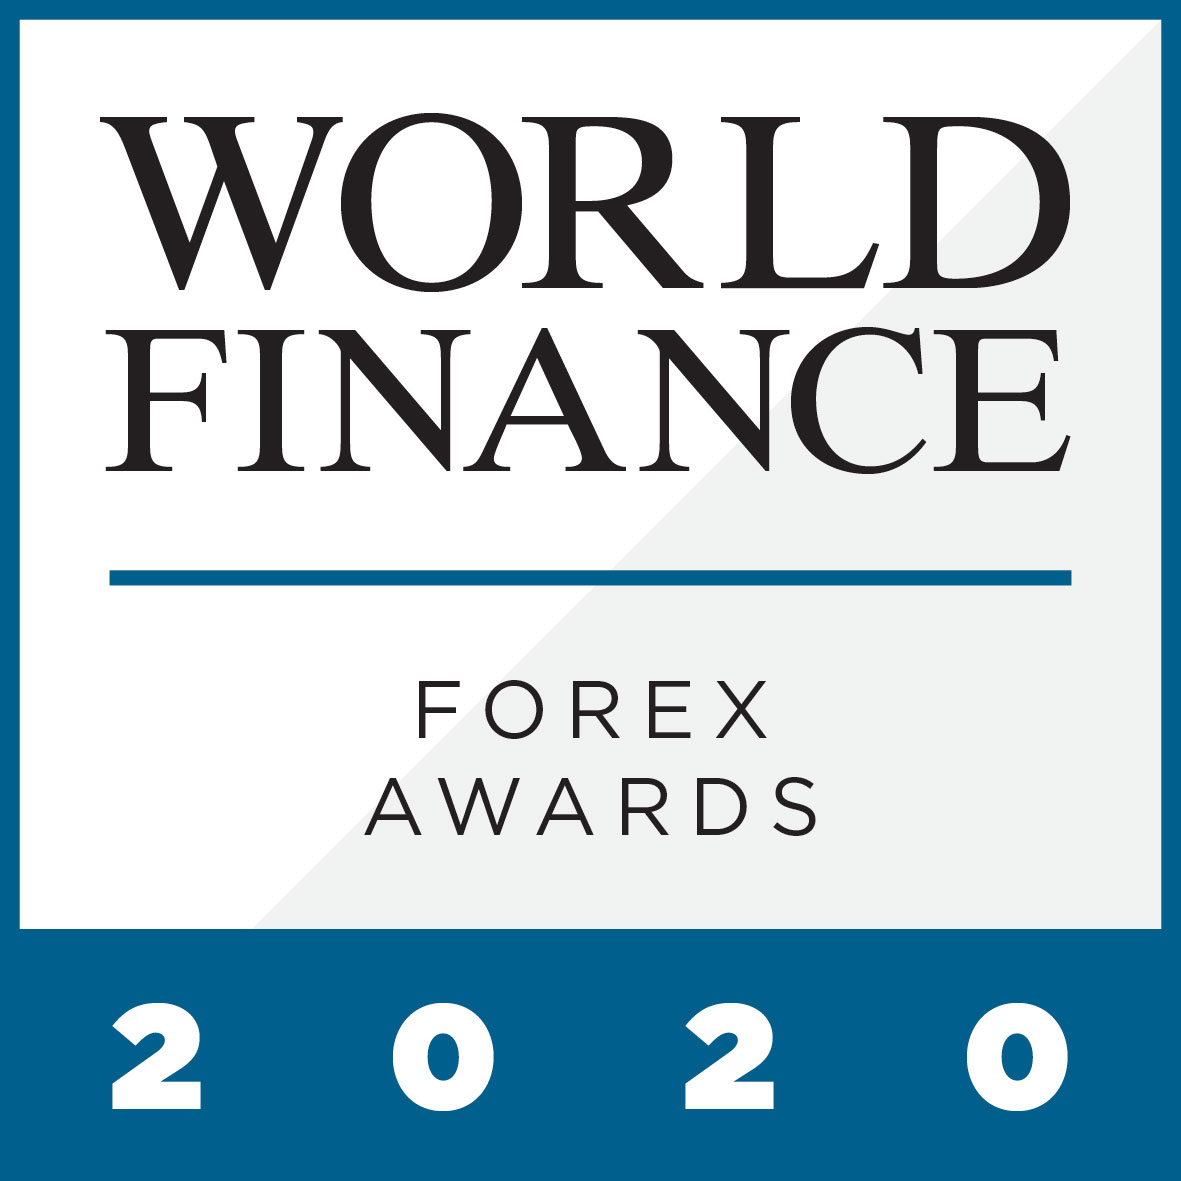 The threat of COVID-19 and the upcoming US presidential election will have significant effects on global currency values. The World Finance Forex Awards 2020 identify the companies set to use this volatility to their advantage